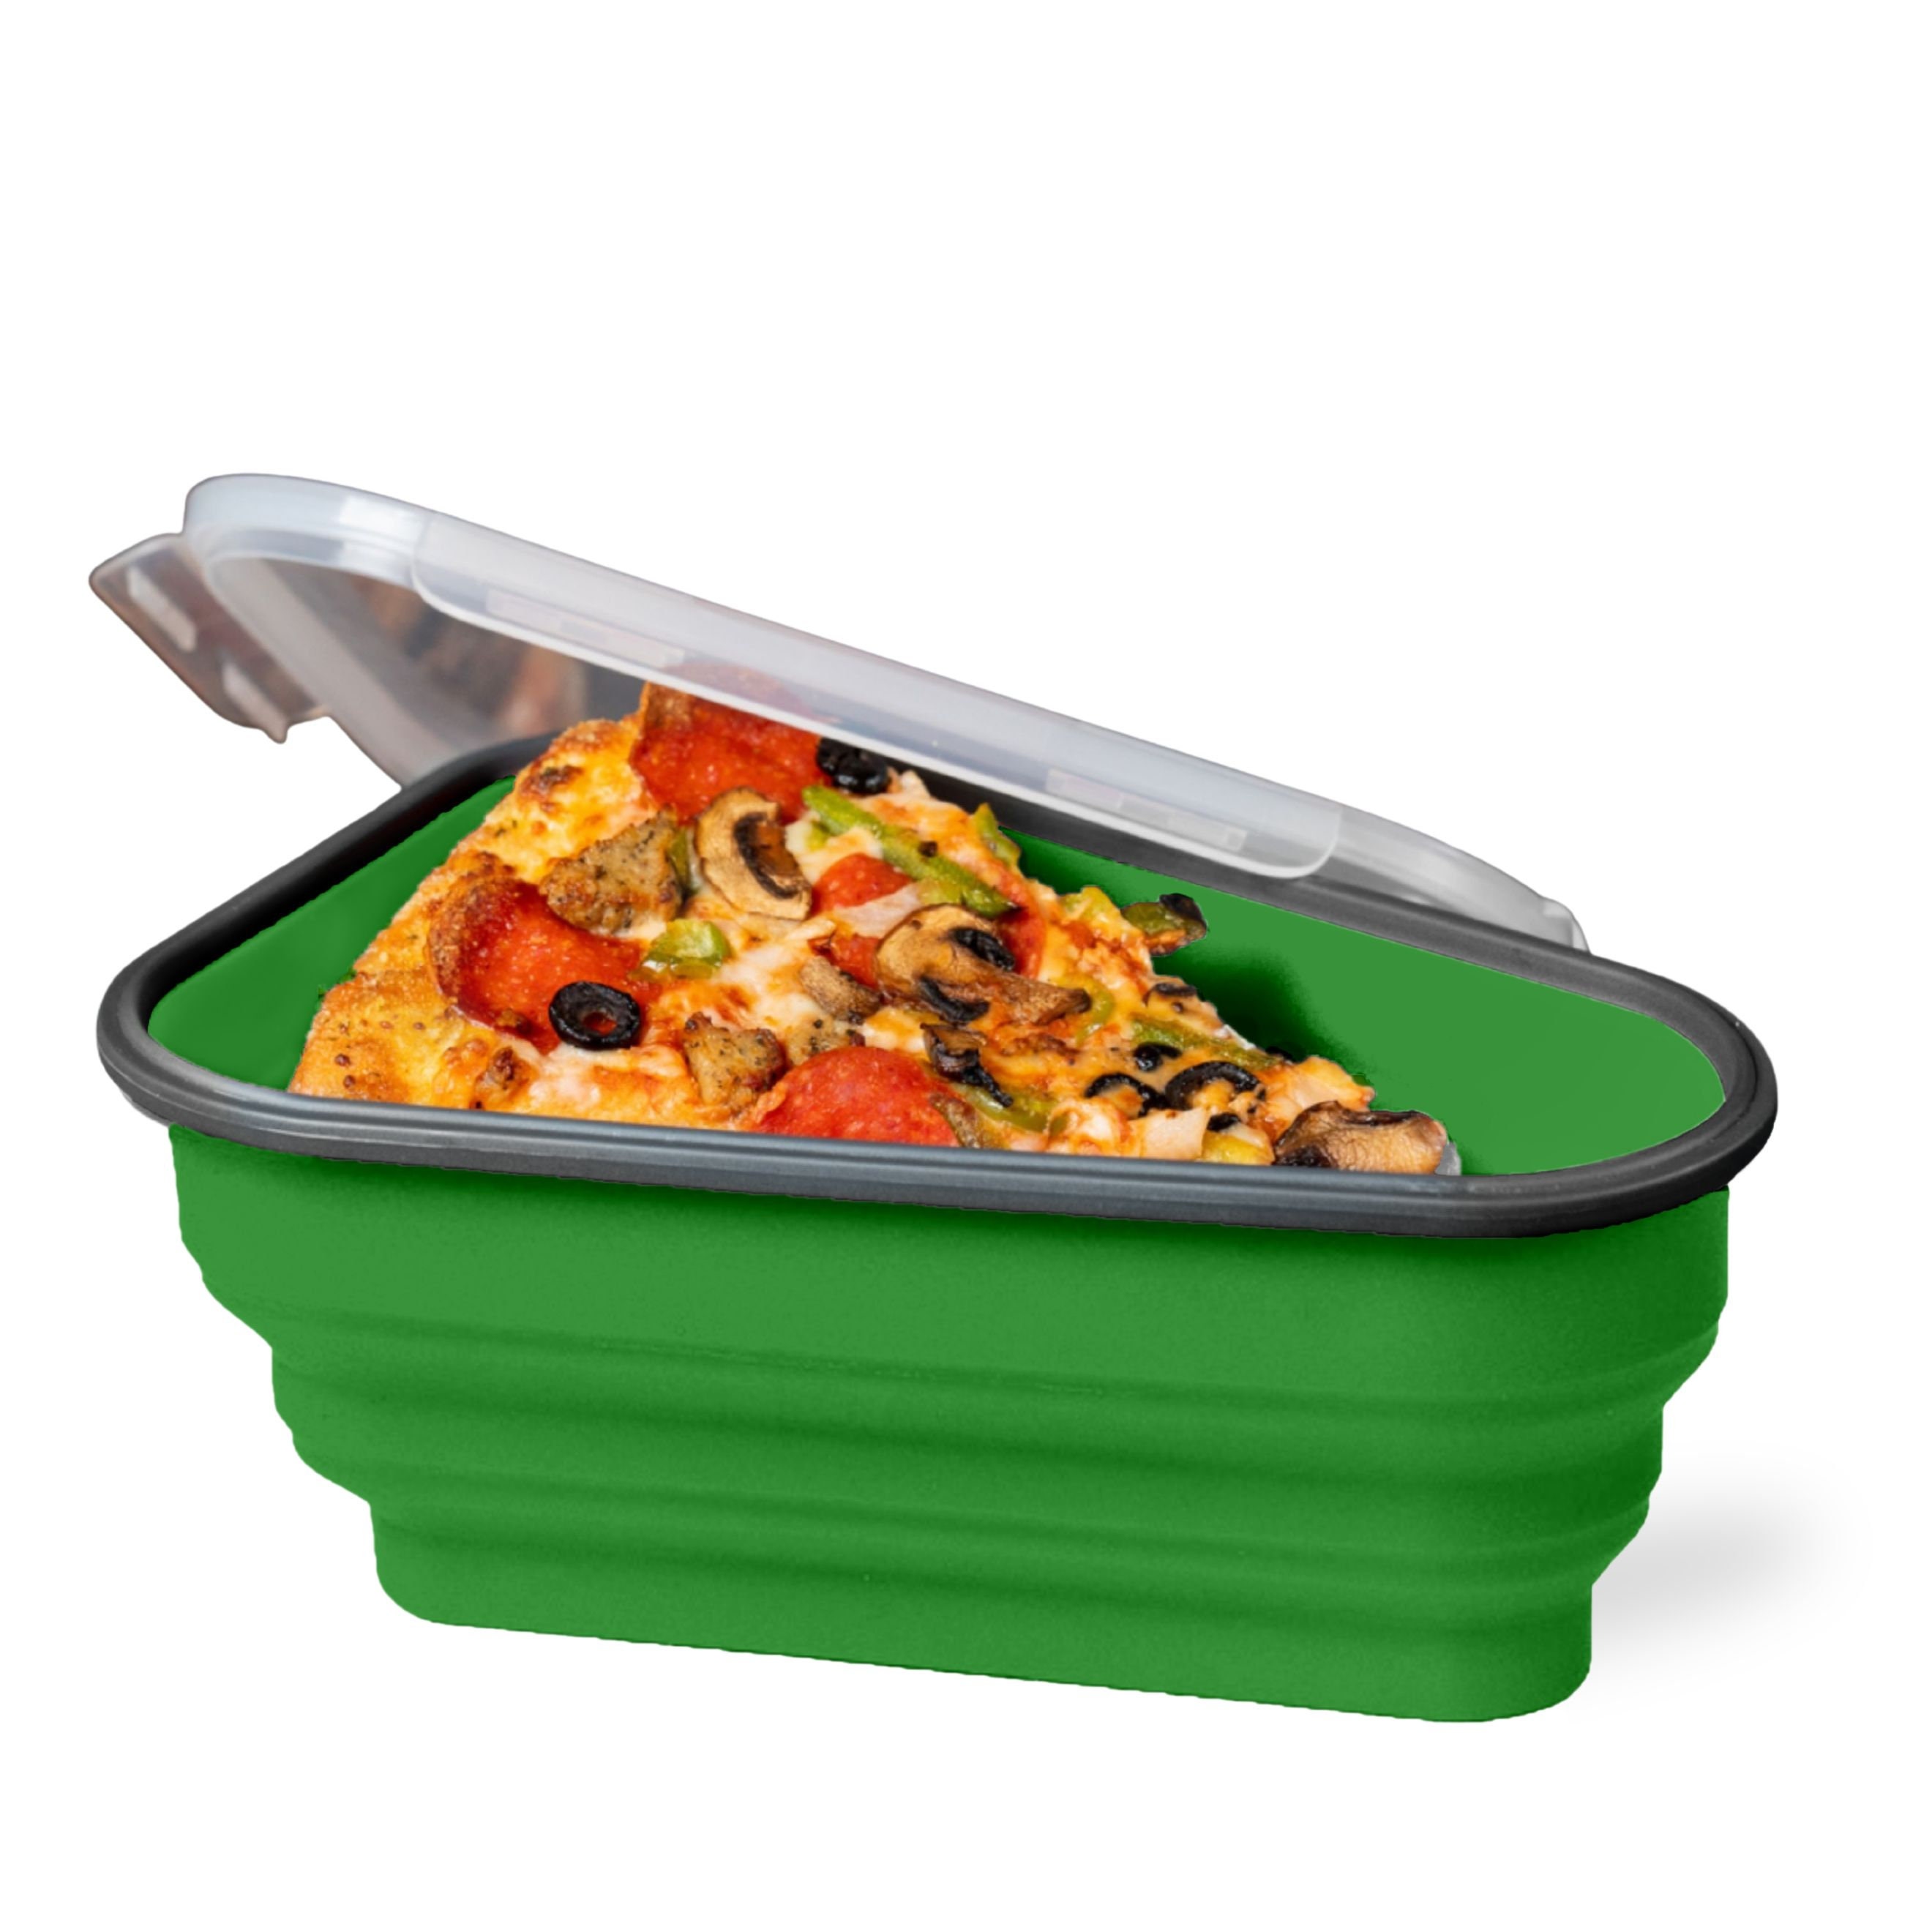 Reusable Pizza Pack Box Foldable Triangular Pizza Storage Container